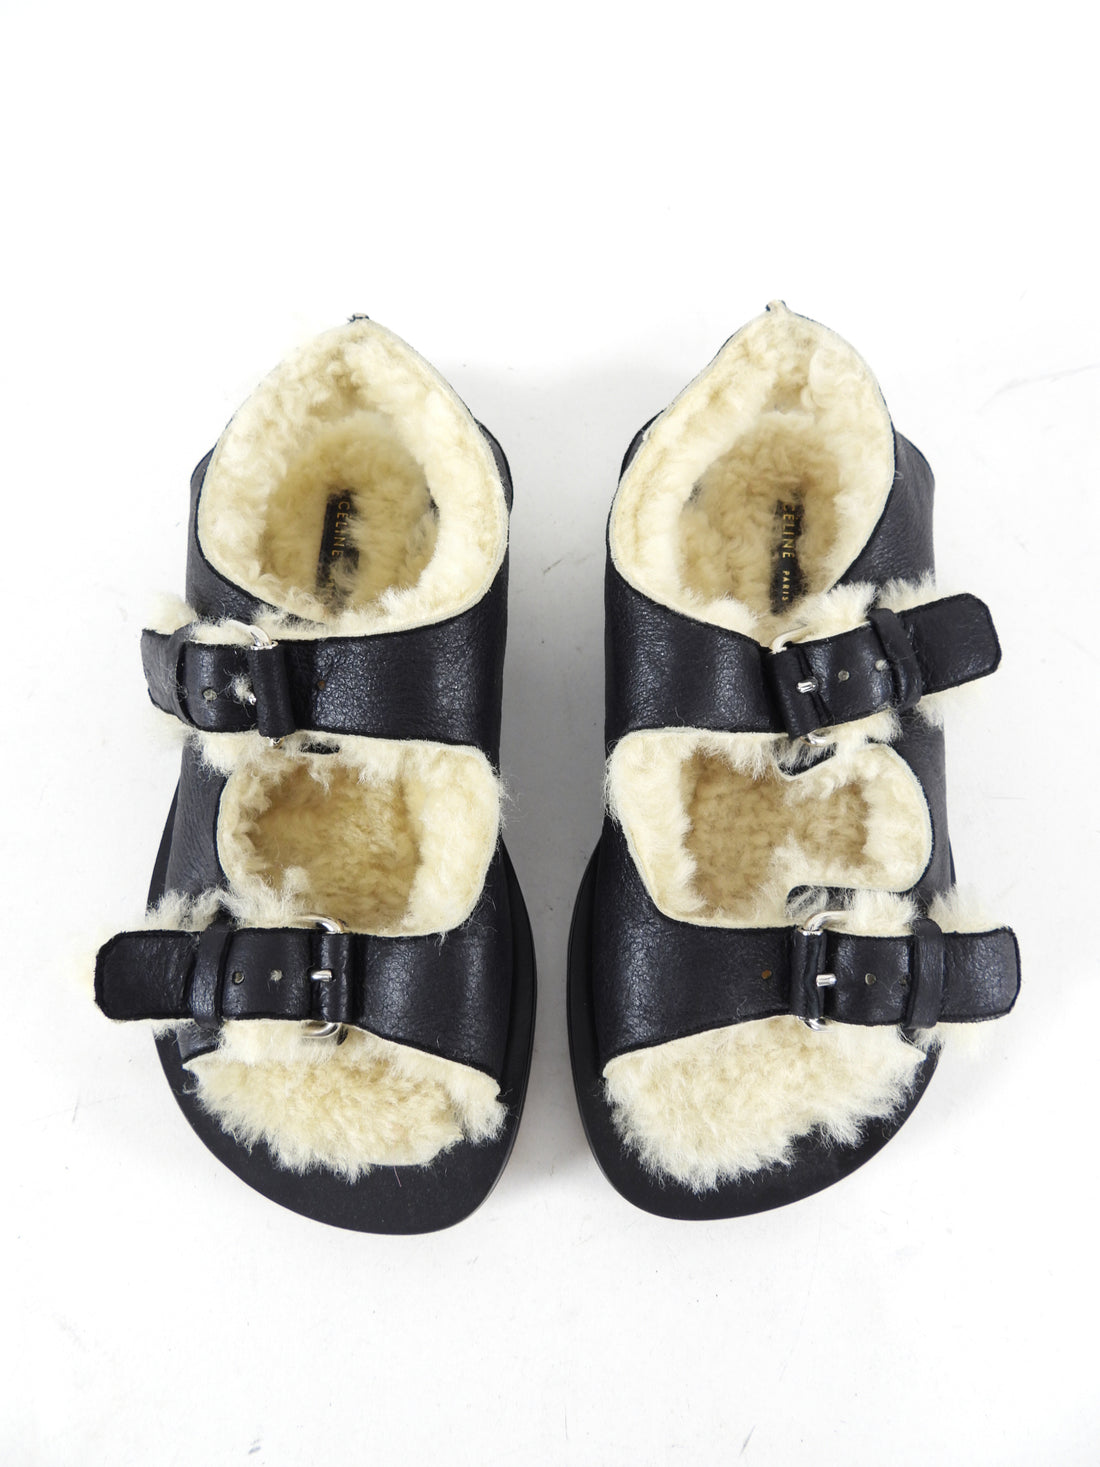 Celine Hiker Double Band Sandals Black and Shearling - 41